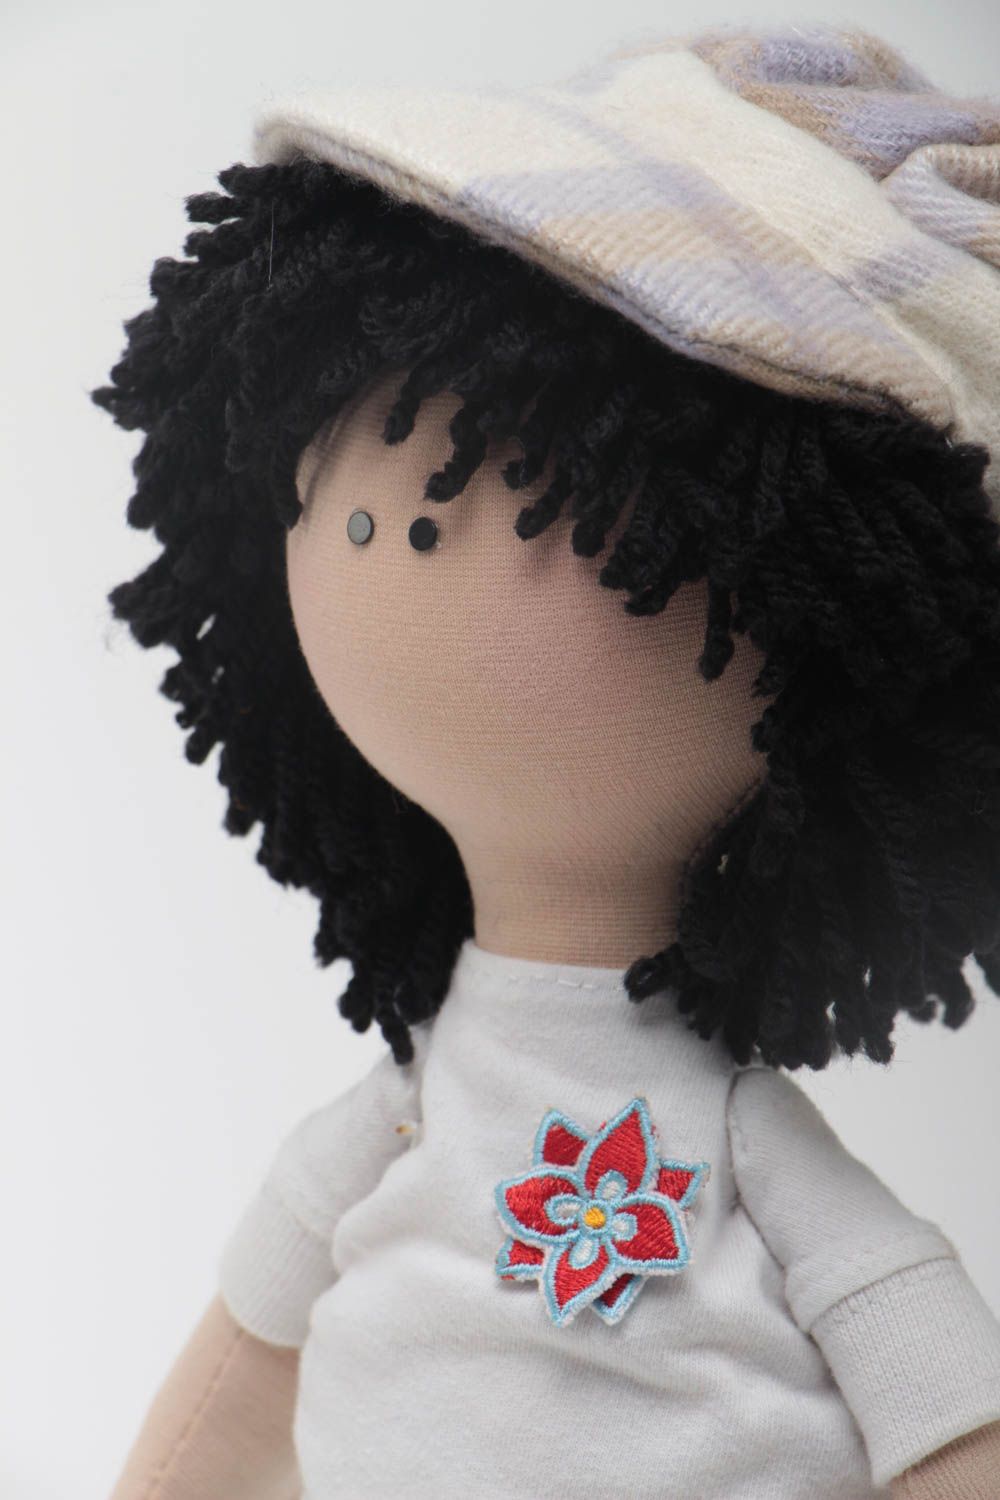 Unusual handcrafted rag doll childrens toy interior decorating gift ideas photo 3